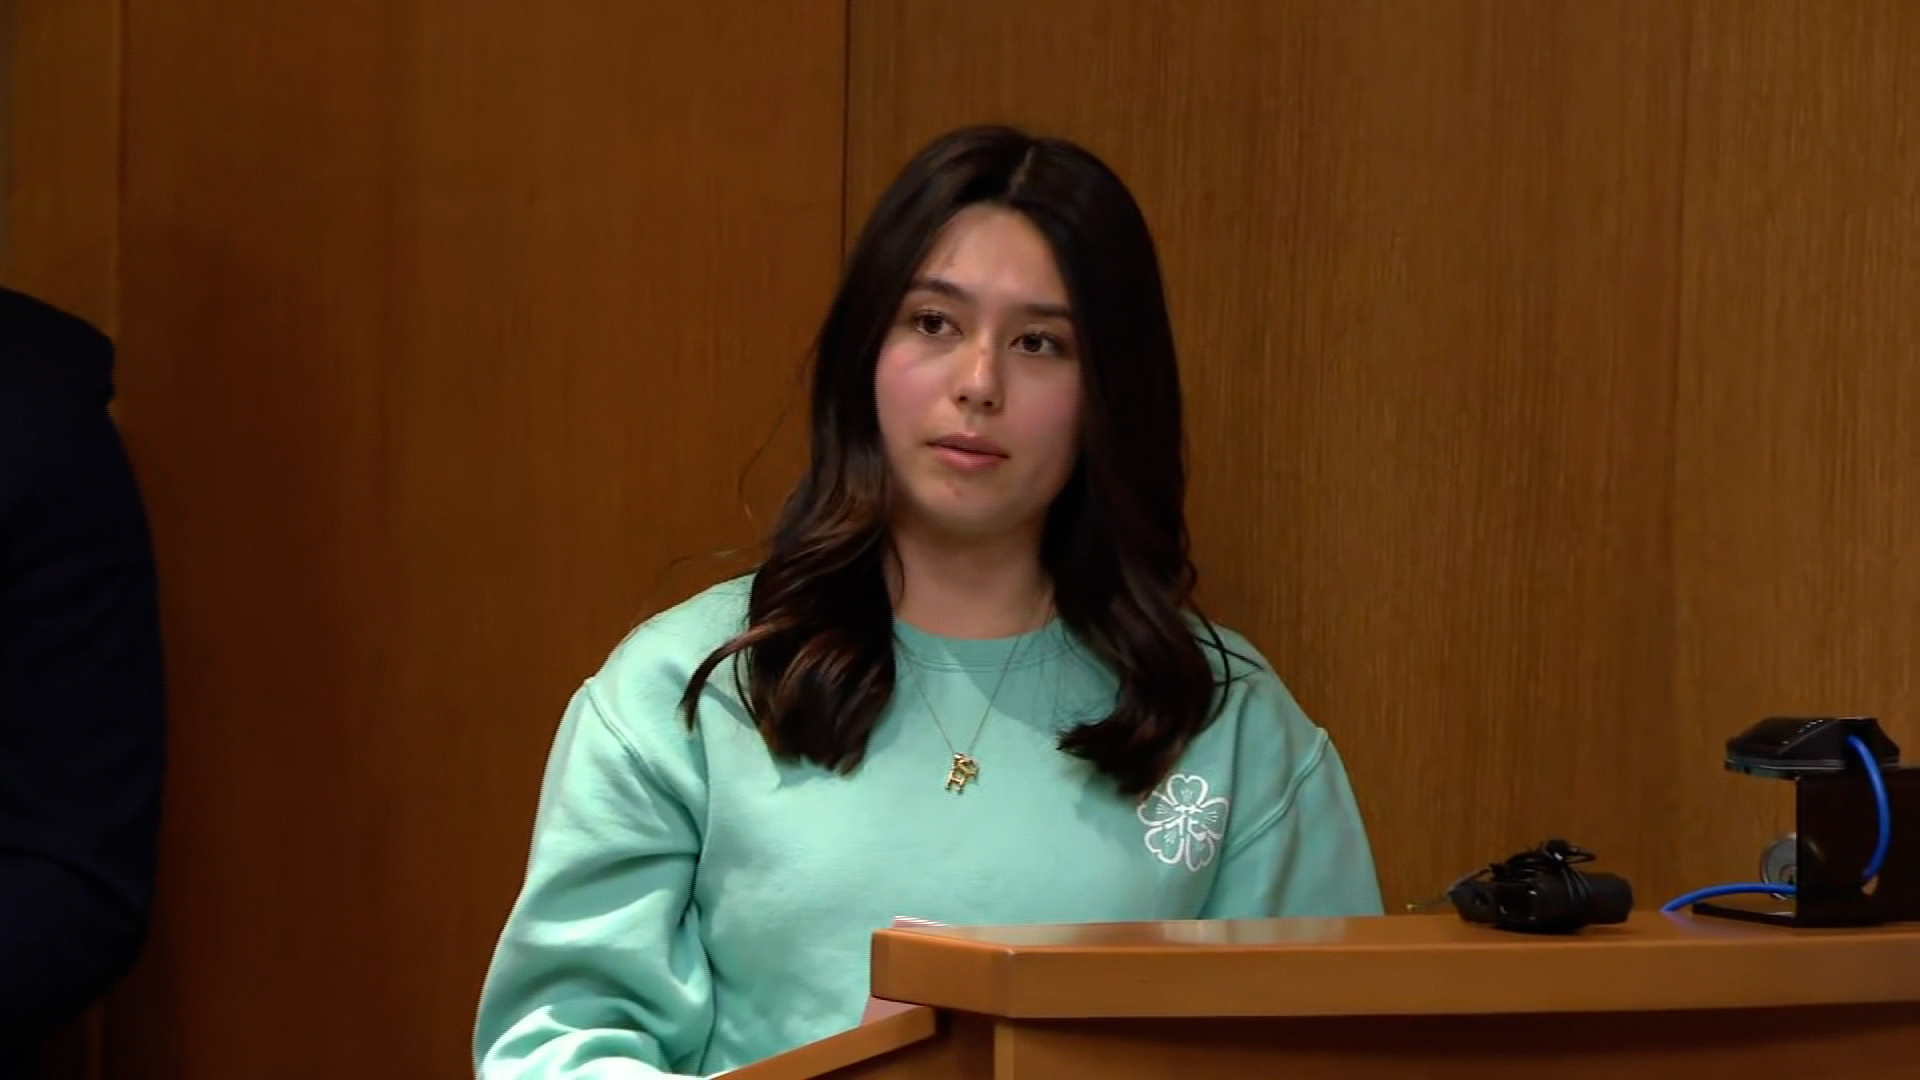 Reina St. Juliana, sister of Hana, gives a victim impact statement in court on Tuesday.